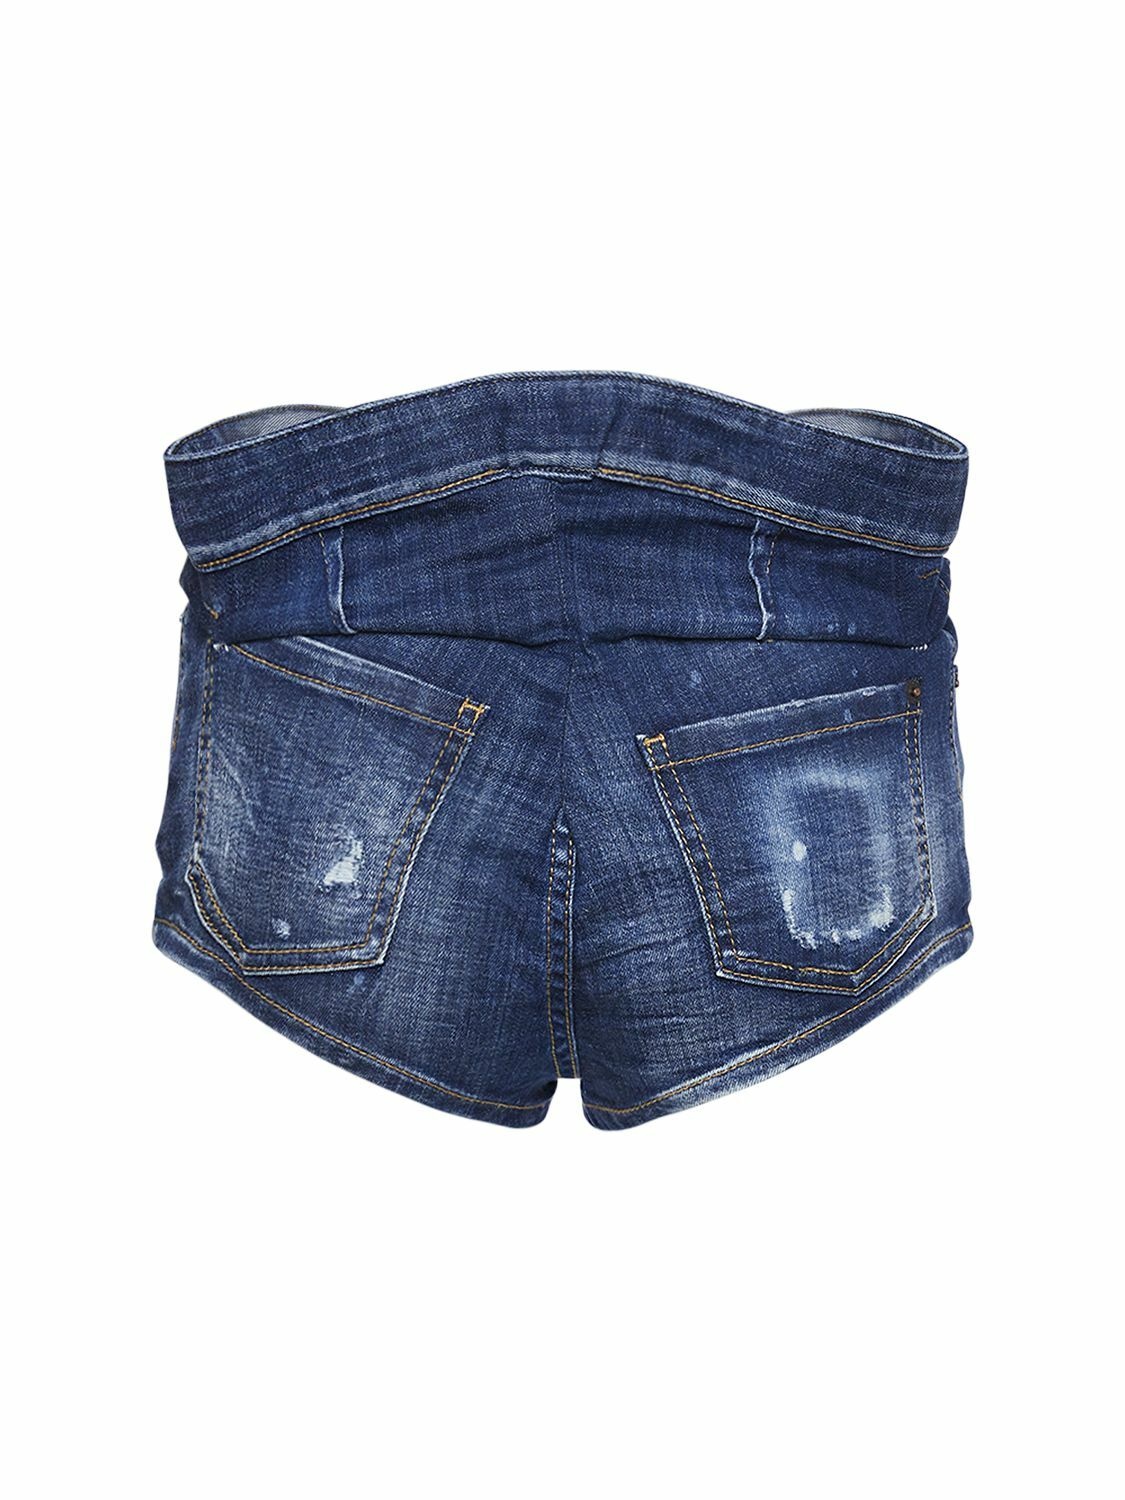 A-Okay Dyed/Washed Women Denim Light Blue Hotpants - Buy A-Okay Dyed/Washed Women  Denim Light Blue Hotpants Online at Best Prices in India | Flipkart.com